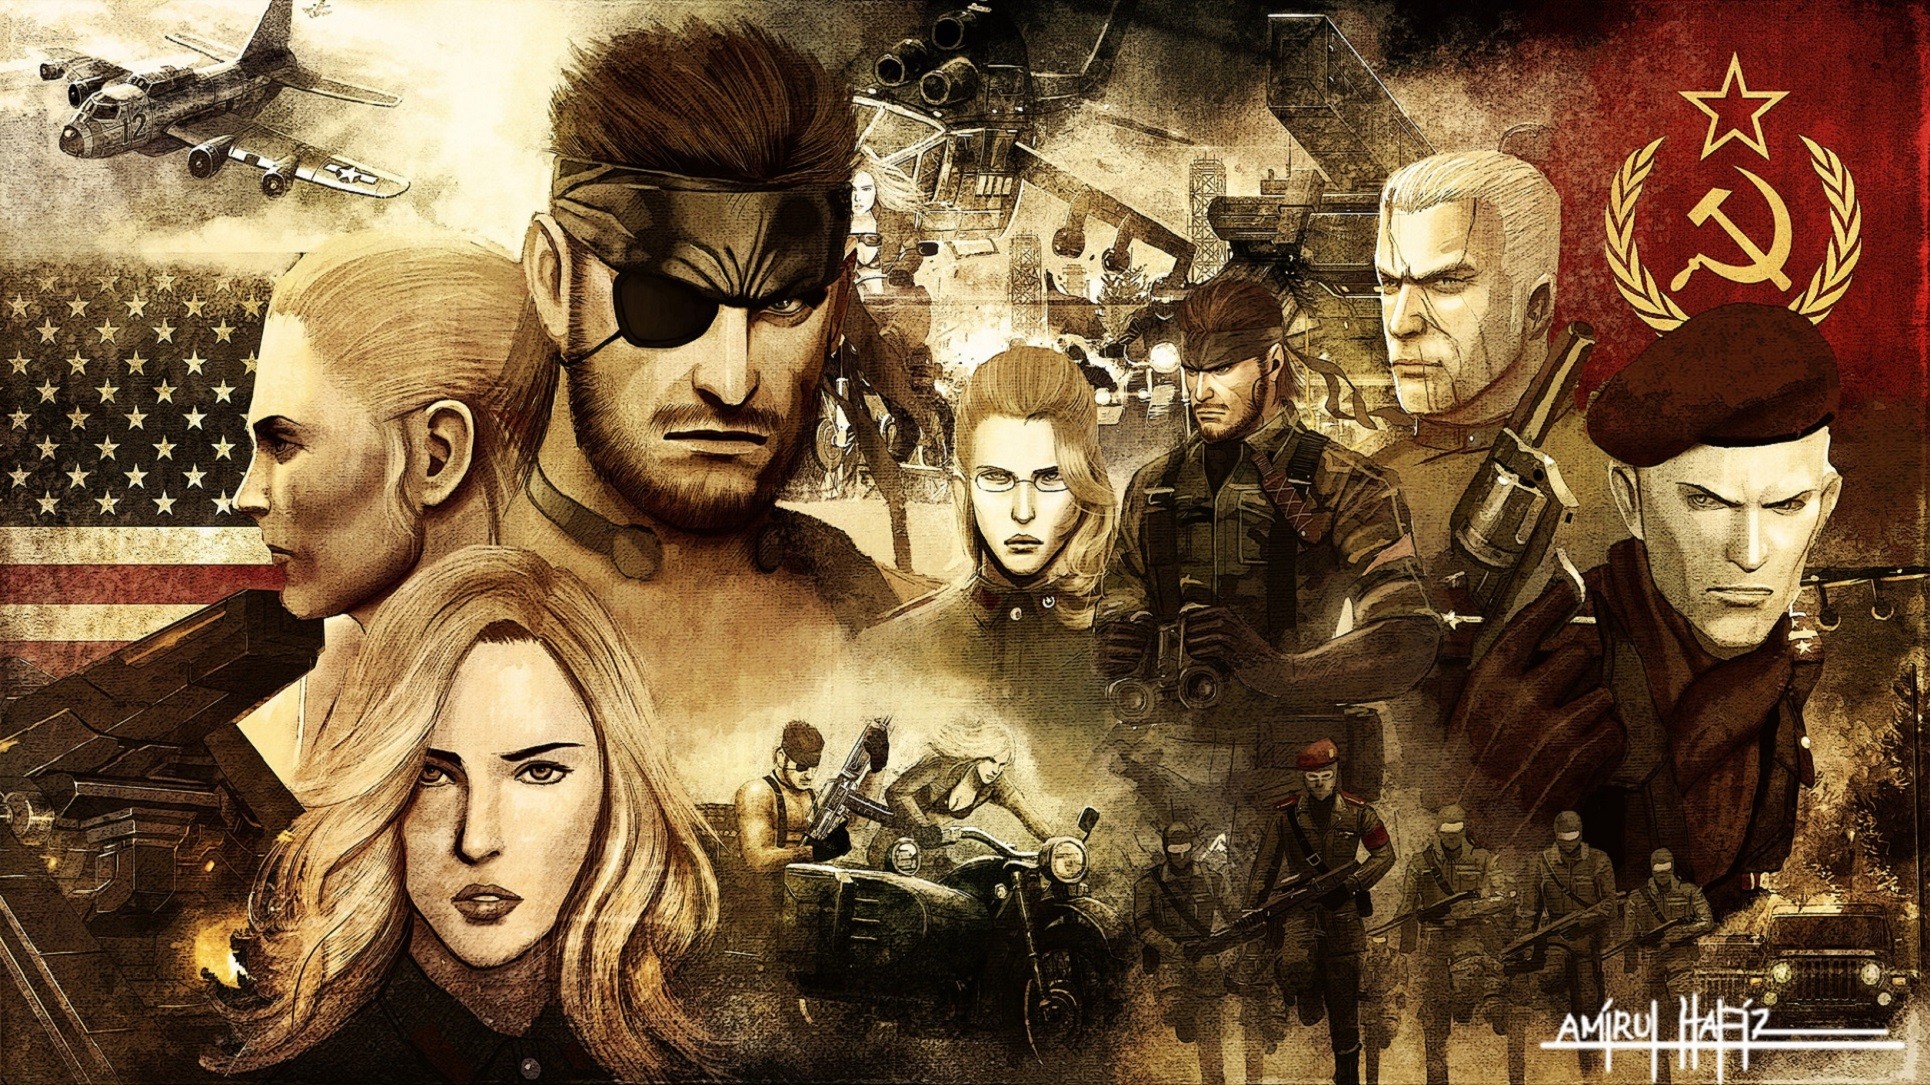 Metal Gear Solid V: The Phantom Pain, Metal Gear Solid 4, Another World Wallpaper